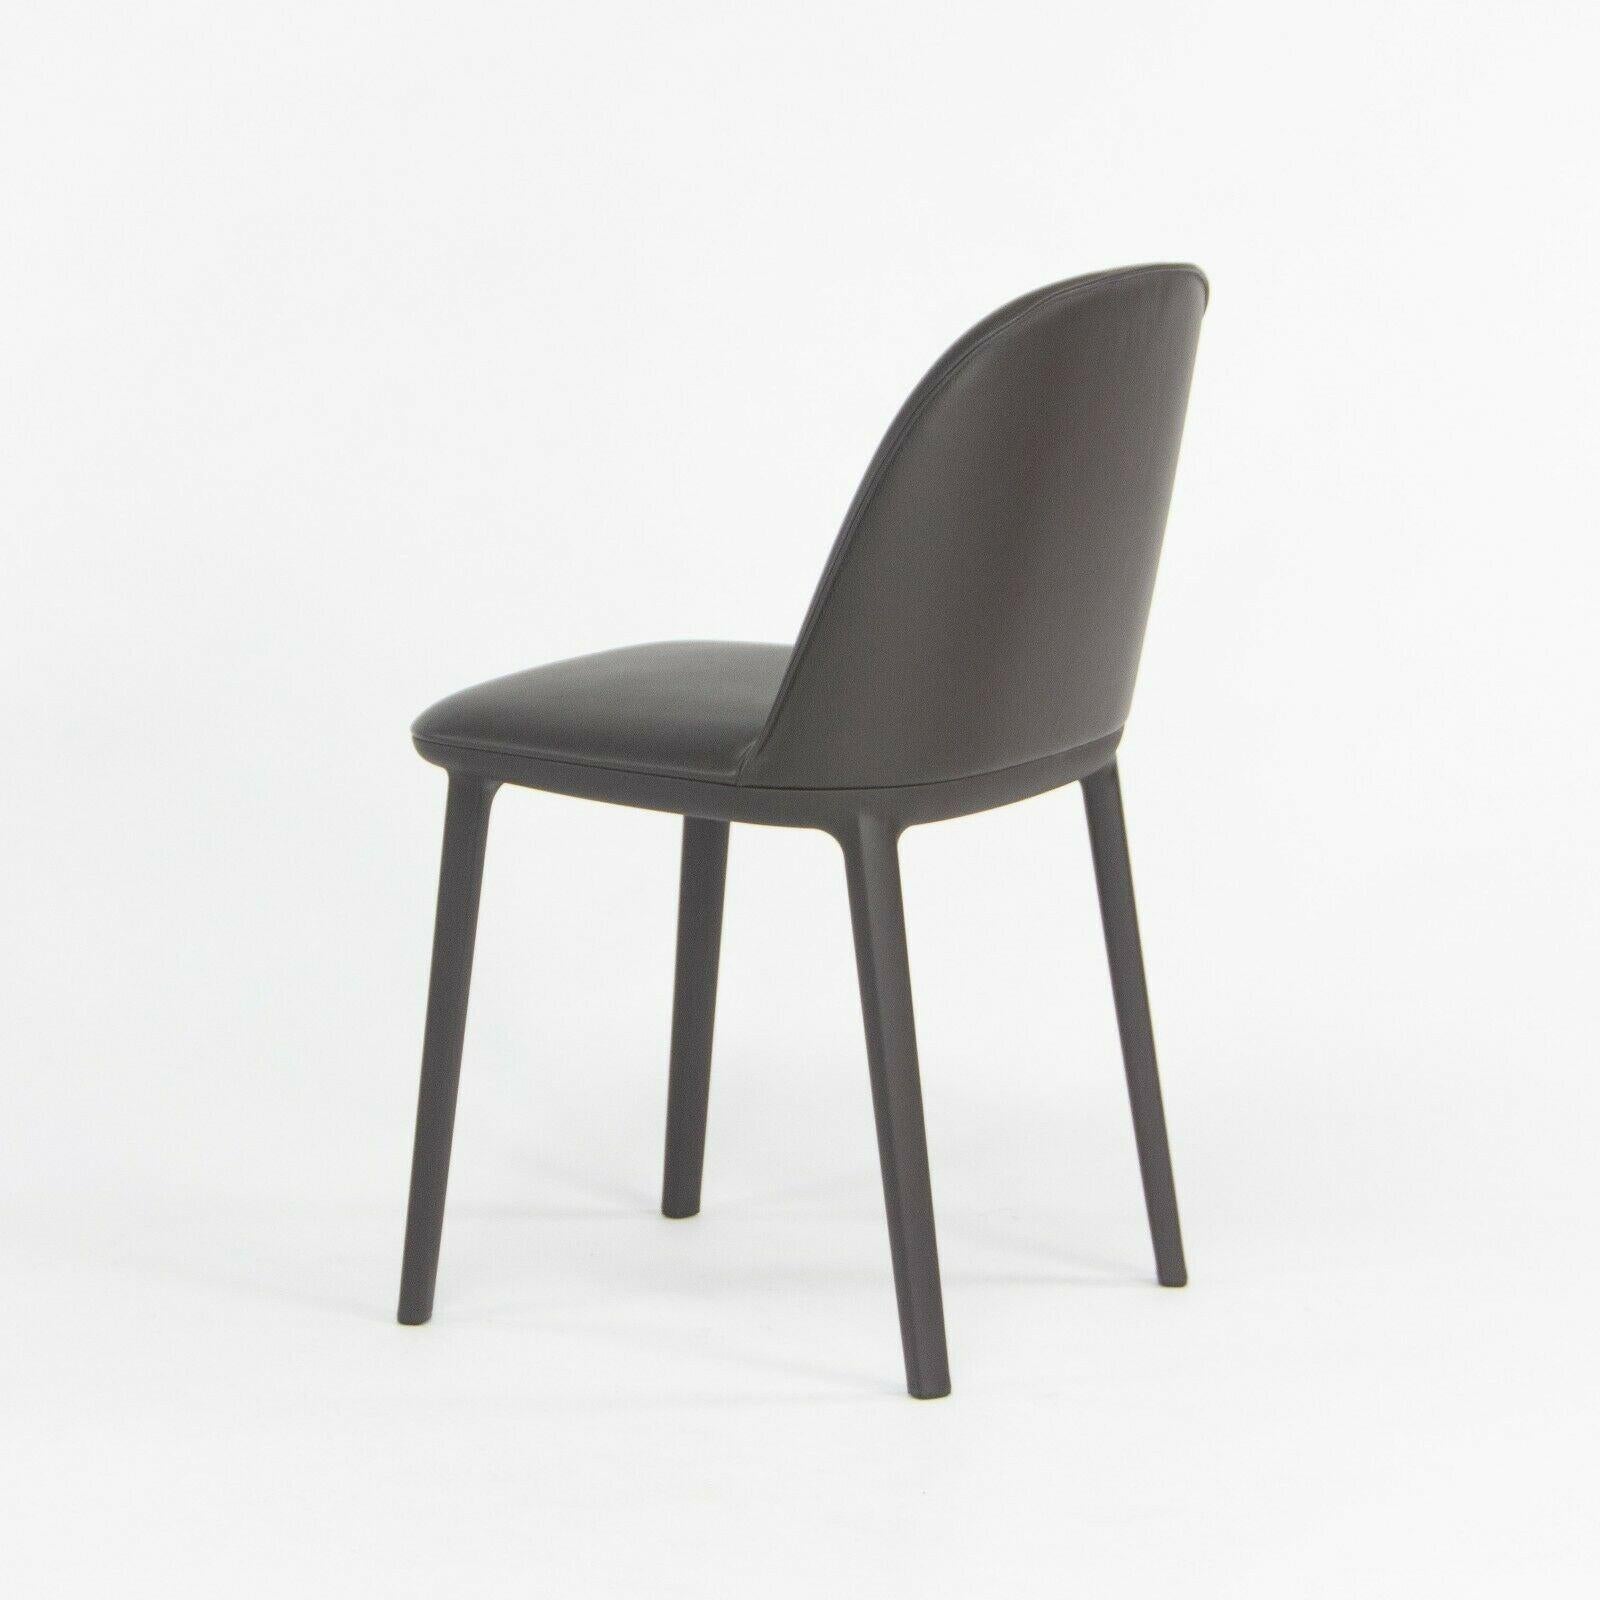 2019 Vitra Softshell Side Chair w Dark Brown Leather by Ronan & Erwan Bouroullec In Good Condition For Sale In Philadelphia, PA